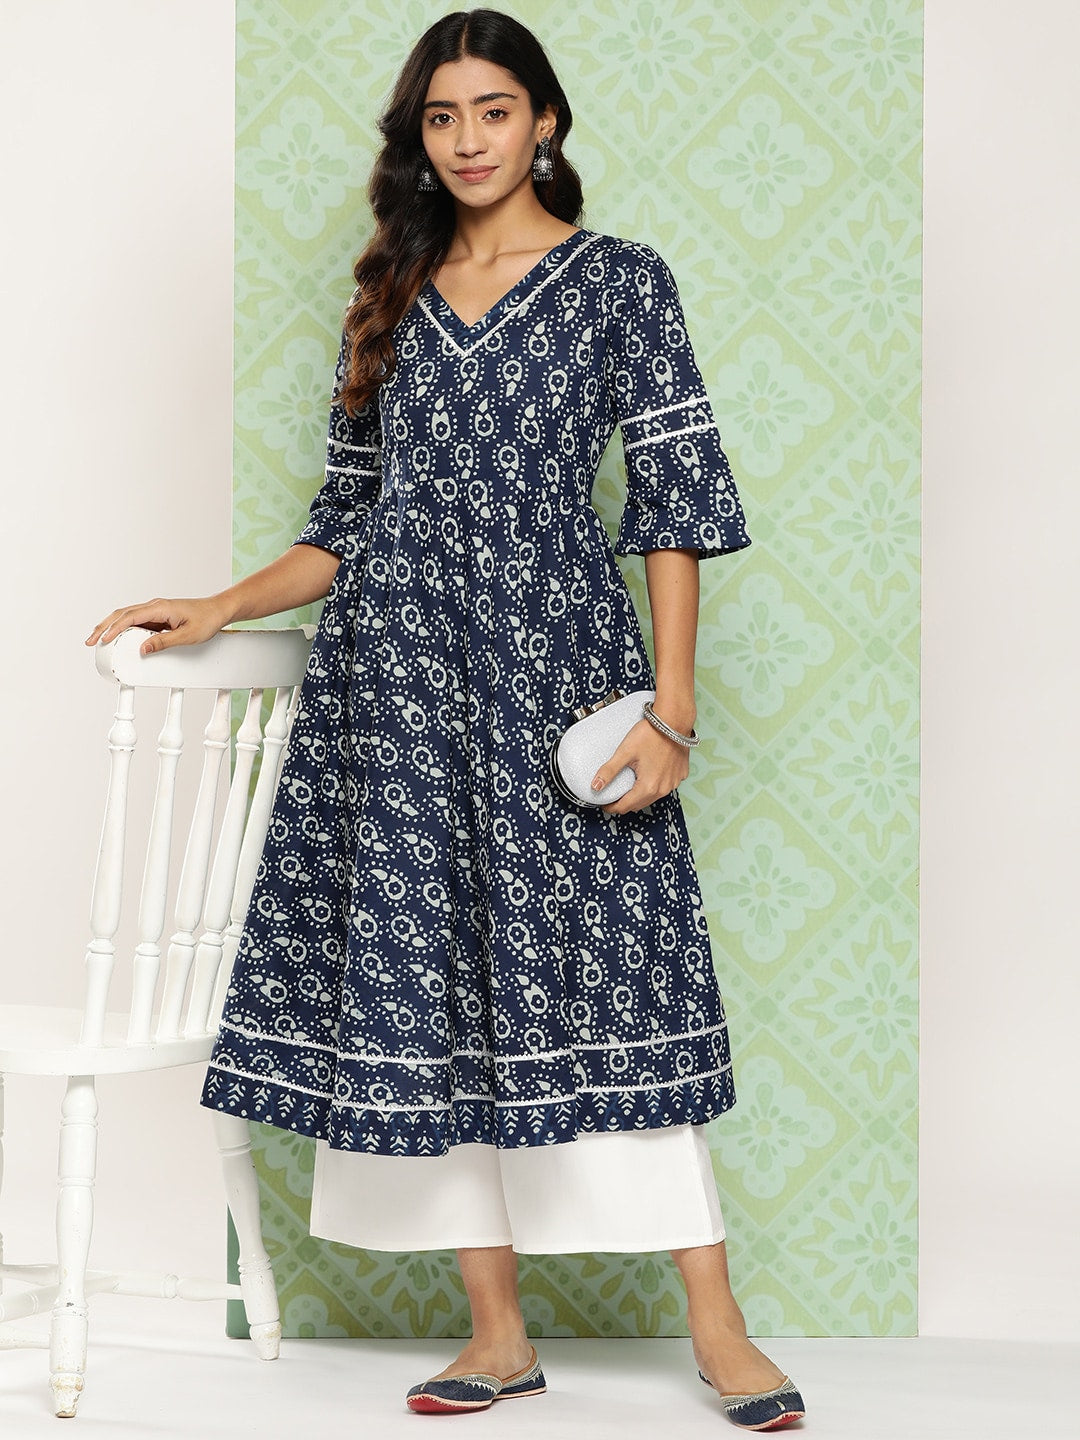 Bombay Paisley dress Limited pieces... - Emporium of India. | Facebook